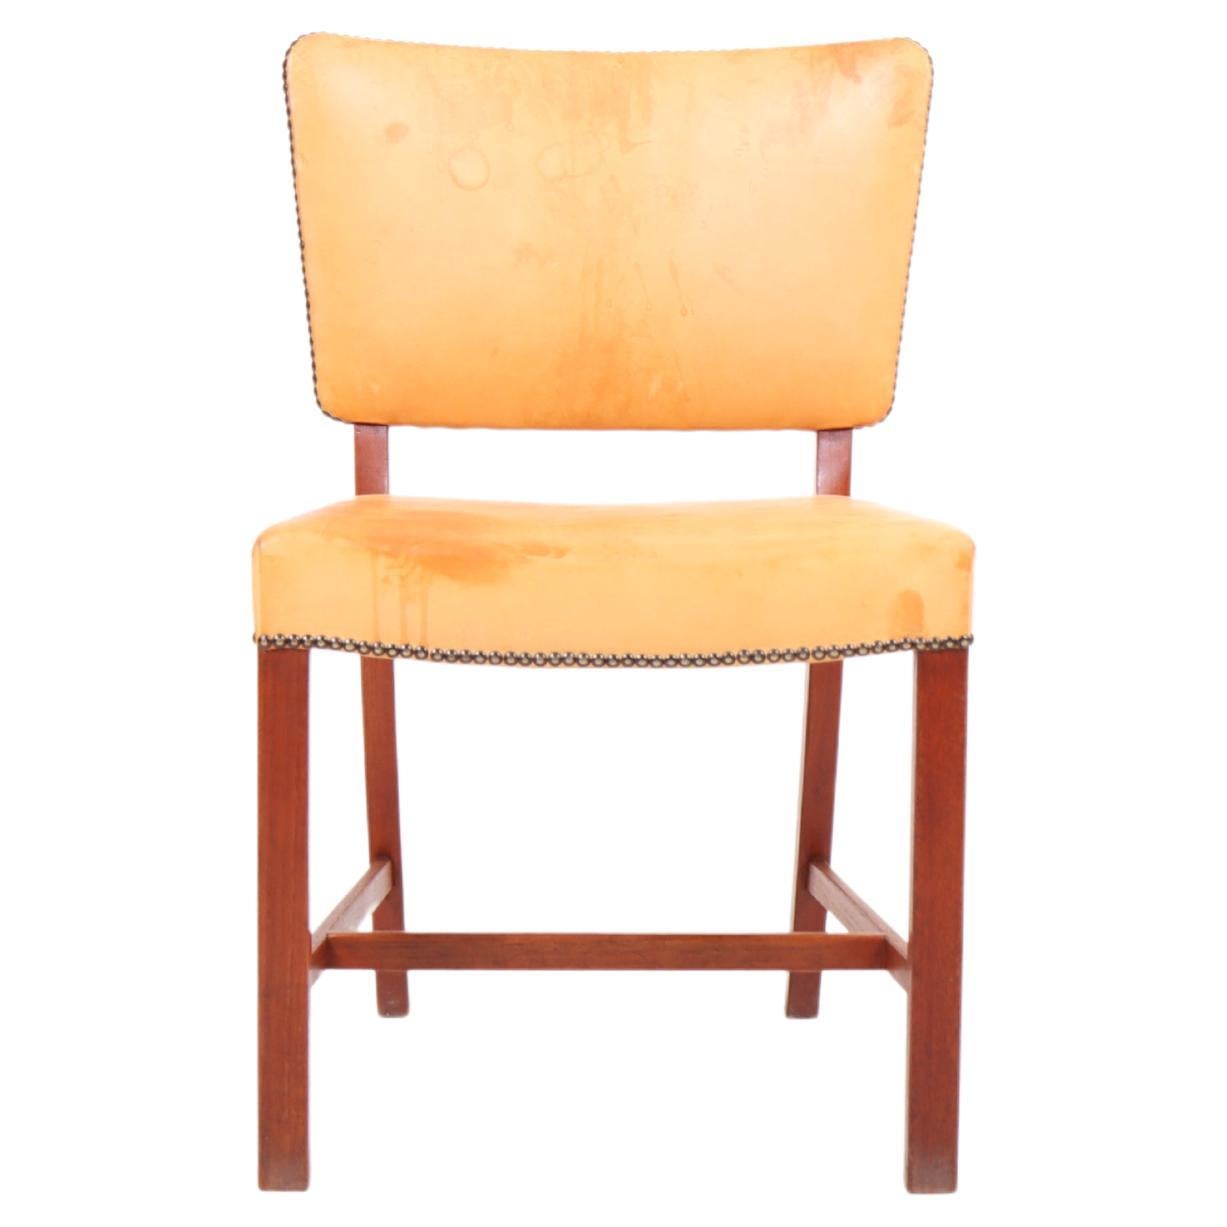 Midcentury Side Chair in Teak and Patinated Leather by Stig Thoresen Lassen For Sale